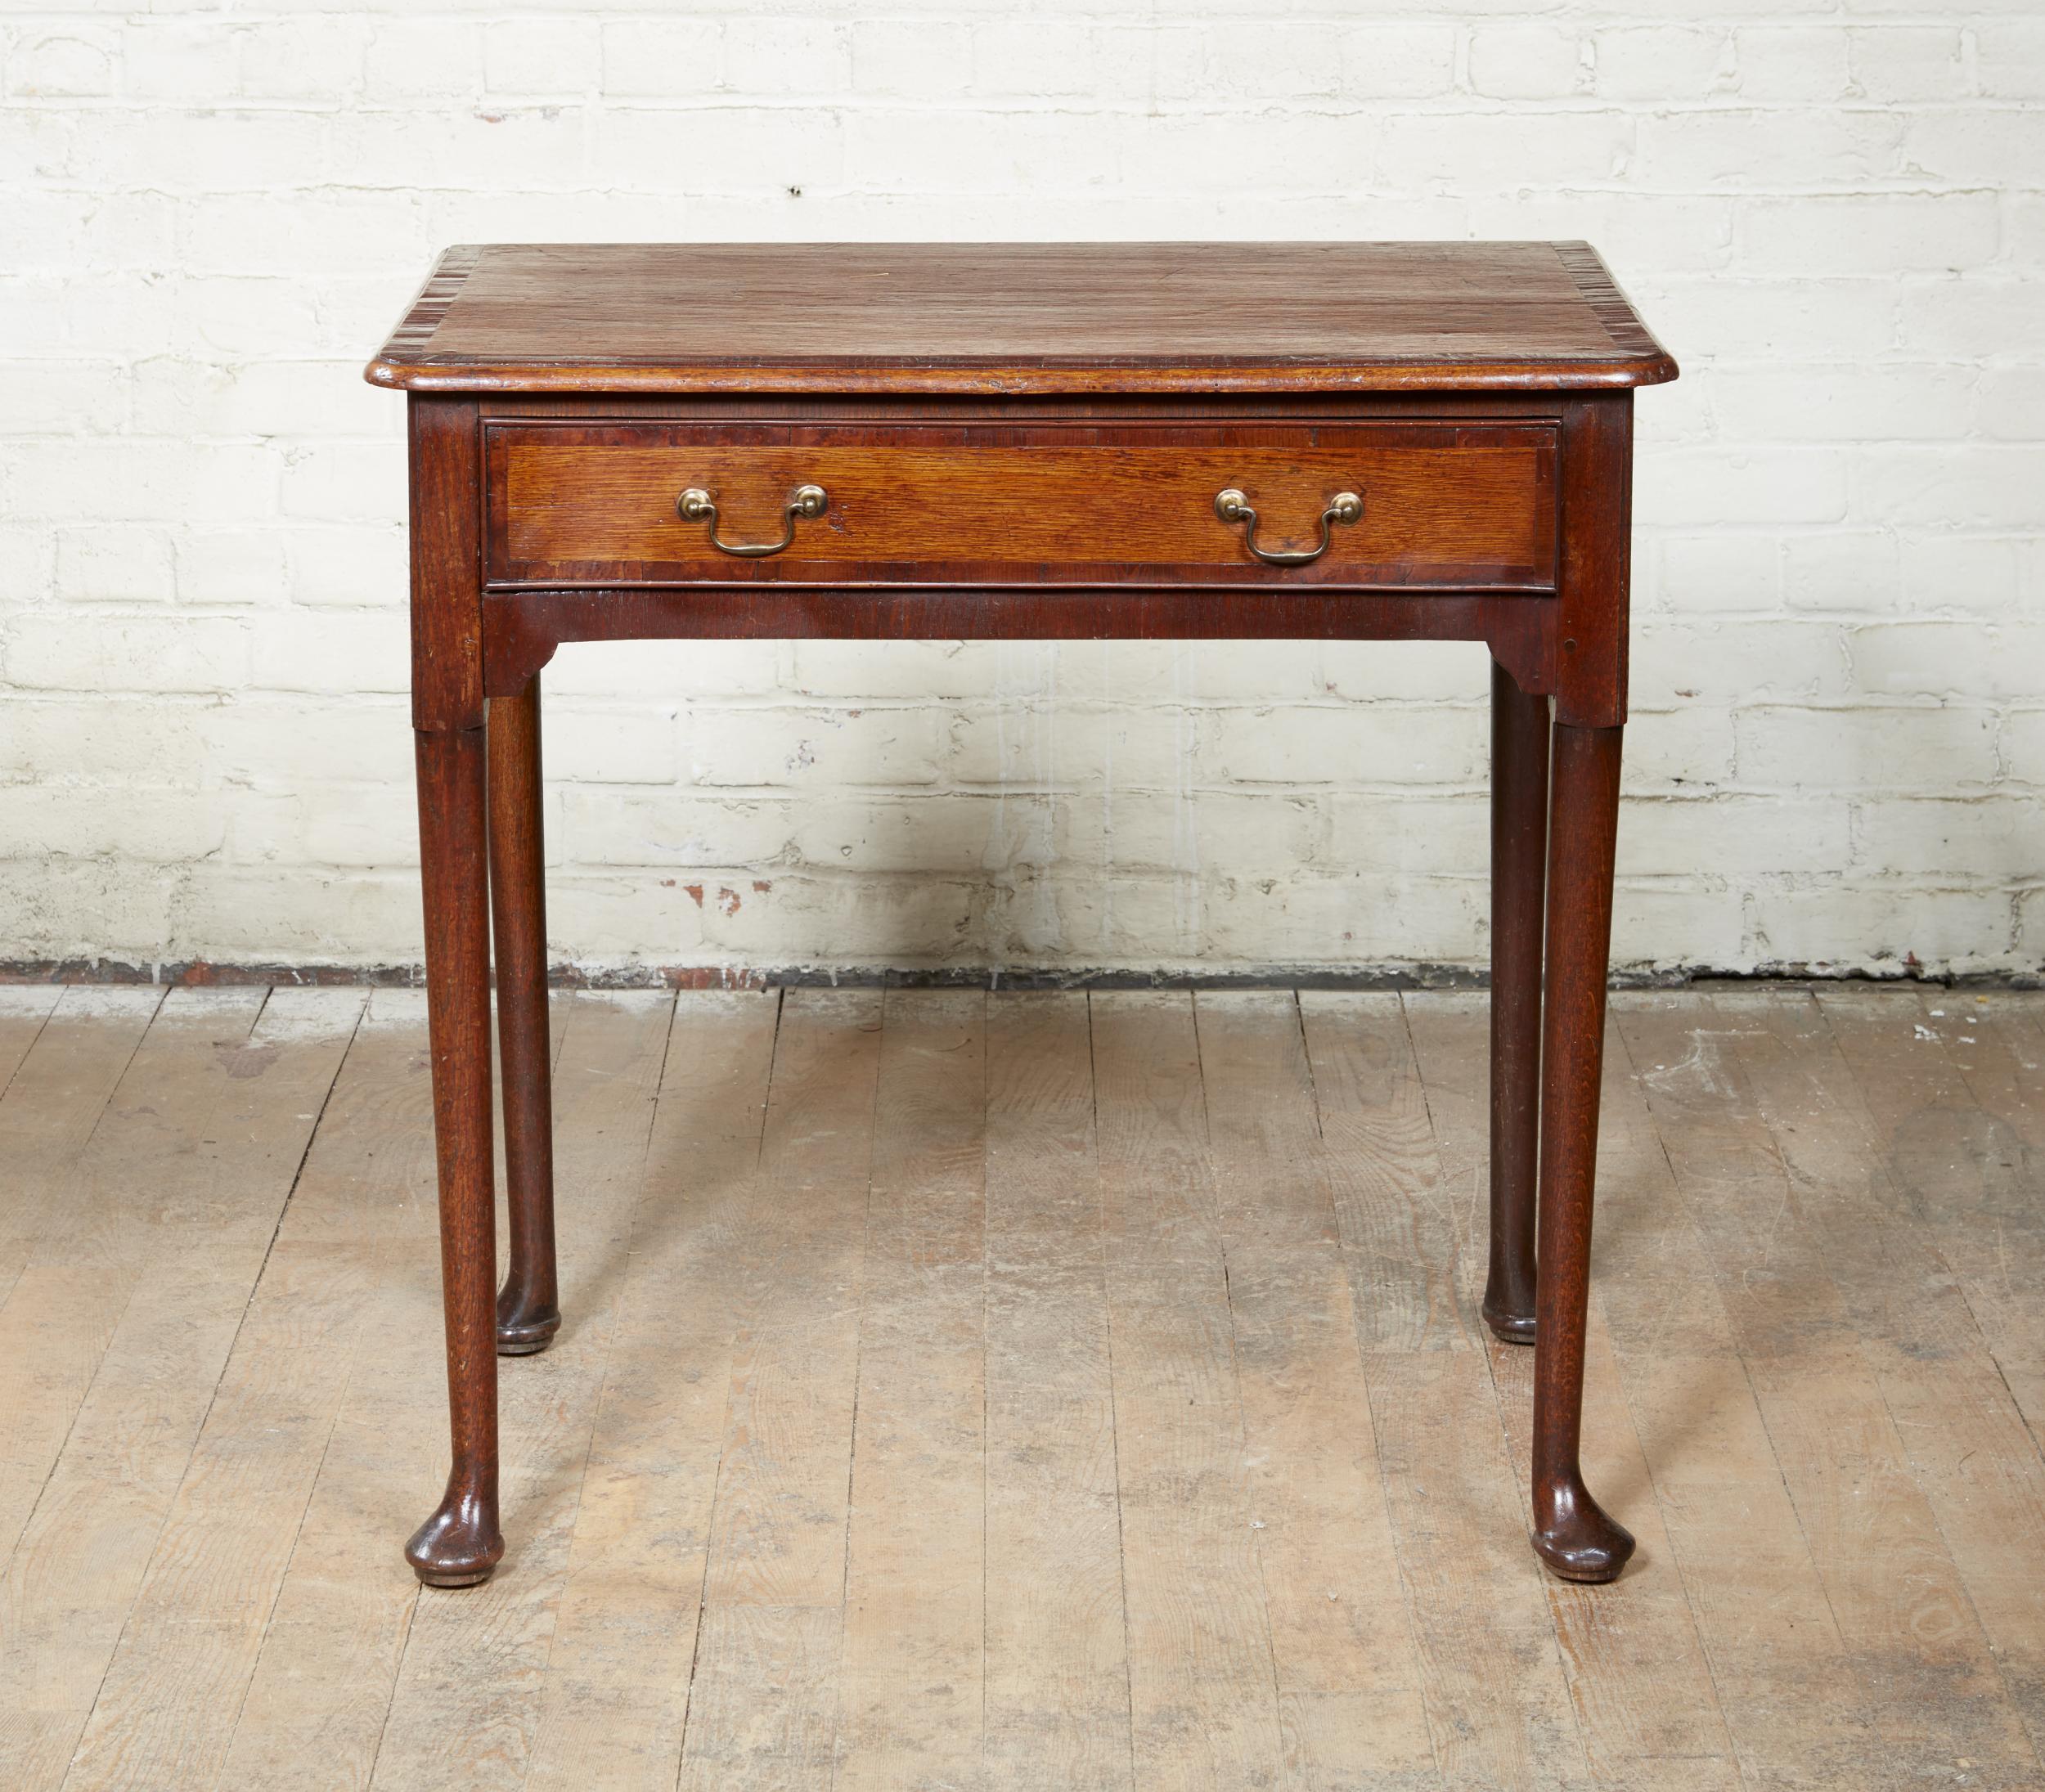 Good English early 18th century oak single drawer side table, the top with rounded corners, fruitwood cross banding and molded edge over single drawer similarly cross banded and retaining original swan neck pulls, over shaped apron and standing on